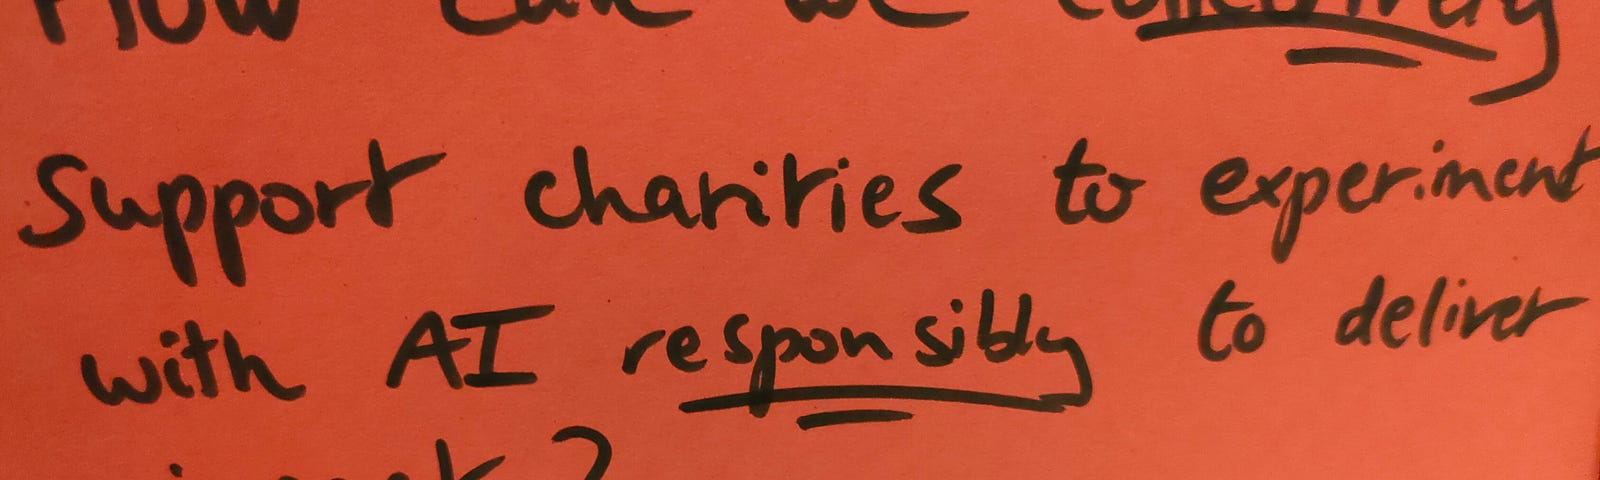 A post-it with the question “how can we collectively support charities to experiment with AI responsibly to deliver impact? Opportunities and gaps? Who’s providing support? Signed: David, CAST